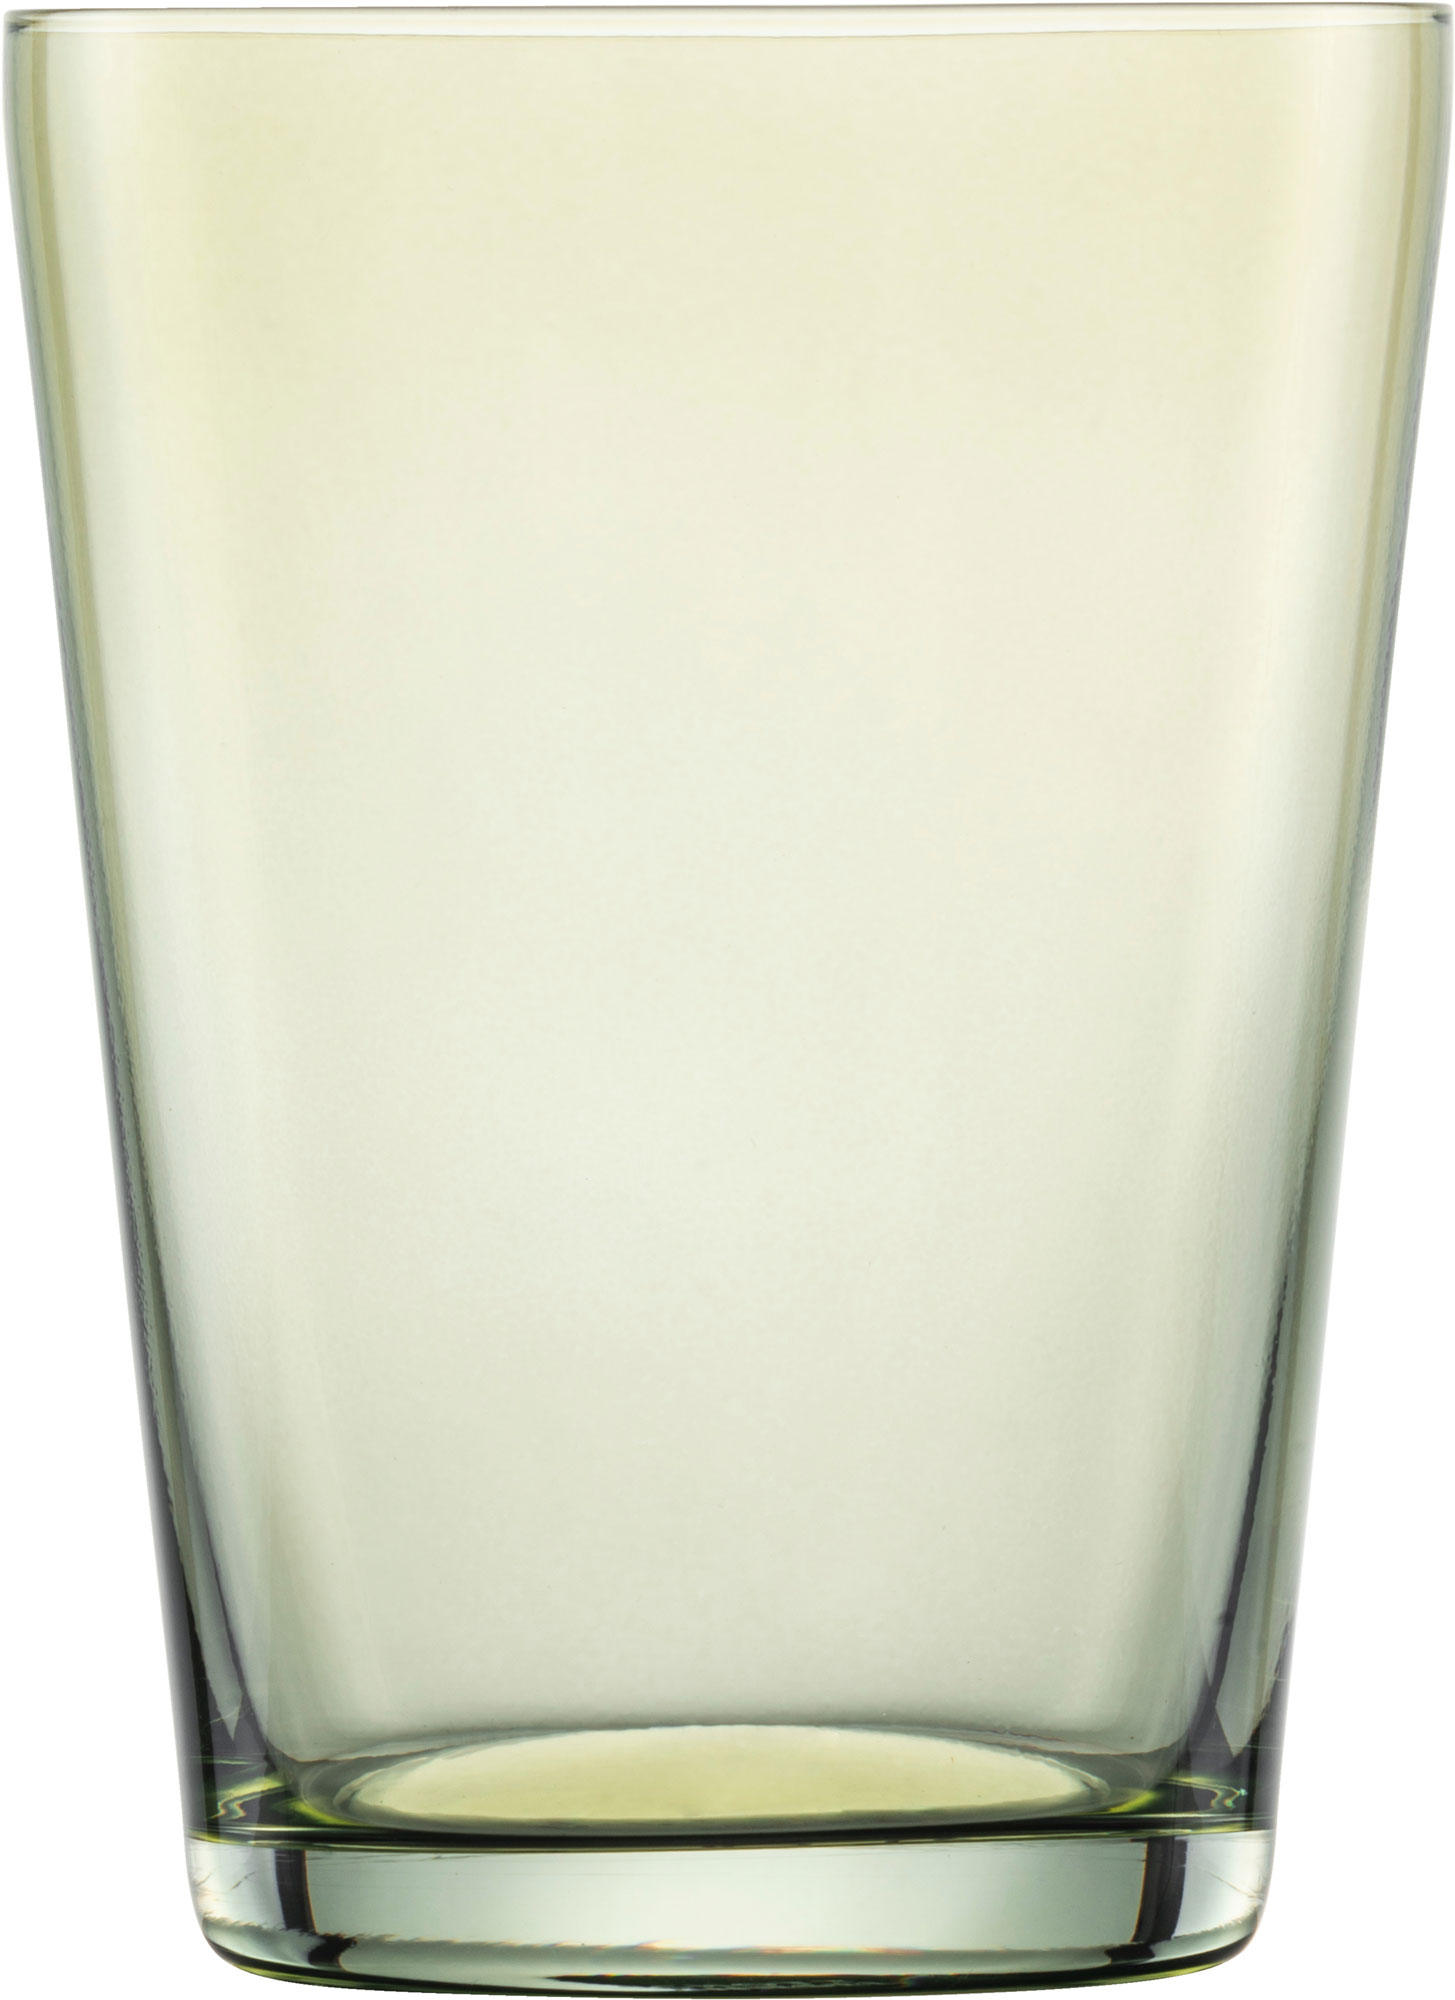 Water glass Sonido olive, Zwiesel Glas - 548ml (1 pc.)